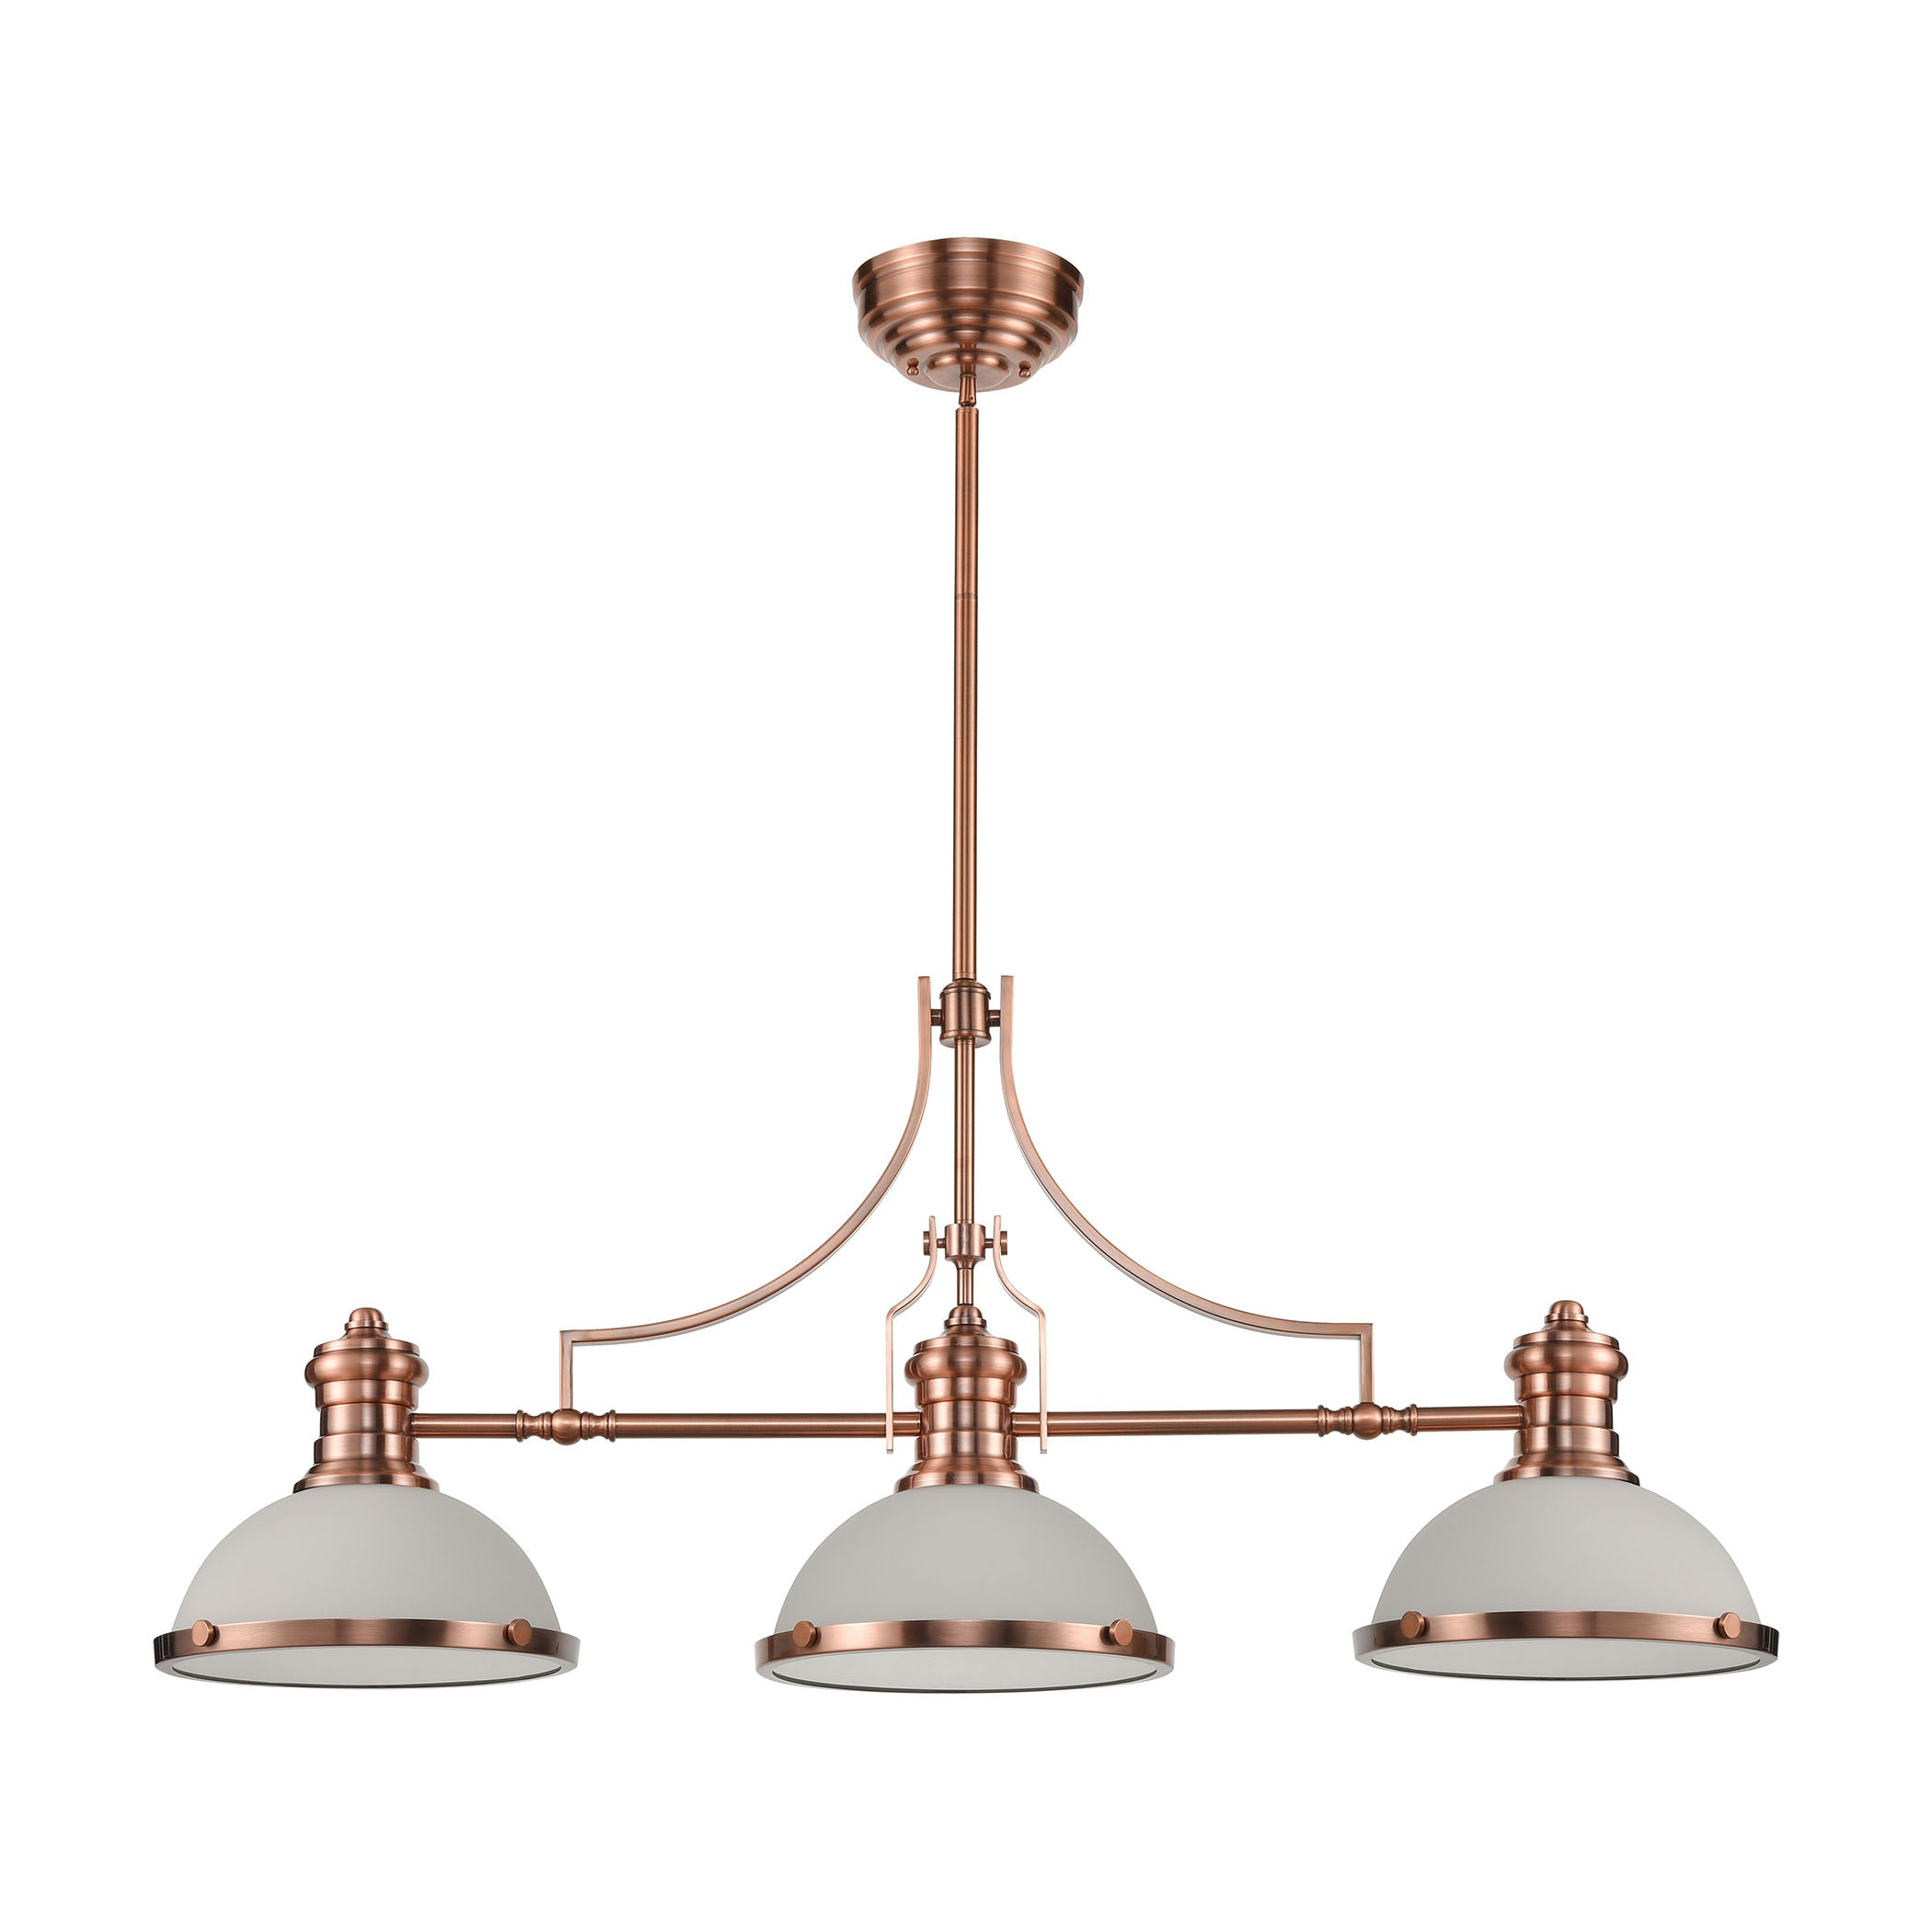 ELK Lighting 66245-3 Chadwick 3-Light Island Light in Antique Copper with White Glass